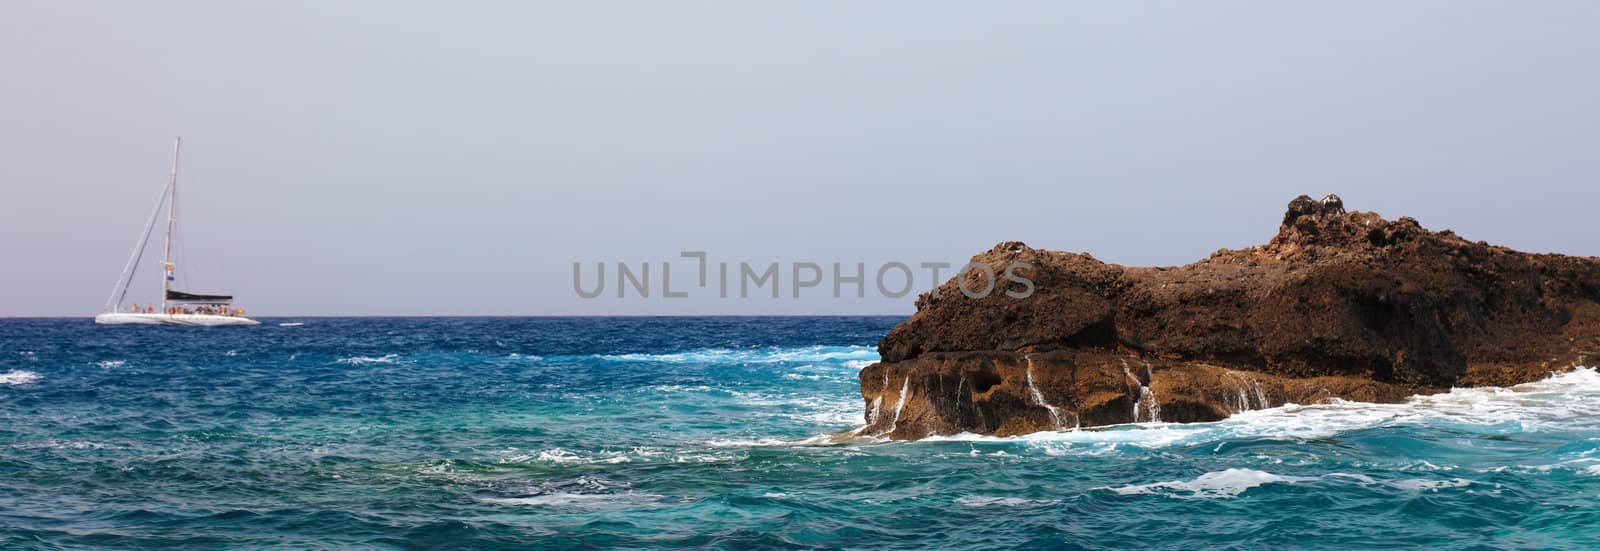 Panoramic view of sailing boat and rock near Tenerife, Canary Is by borodaev